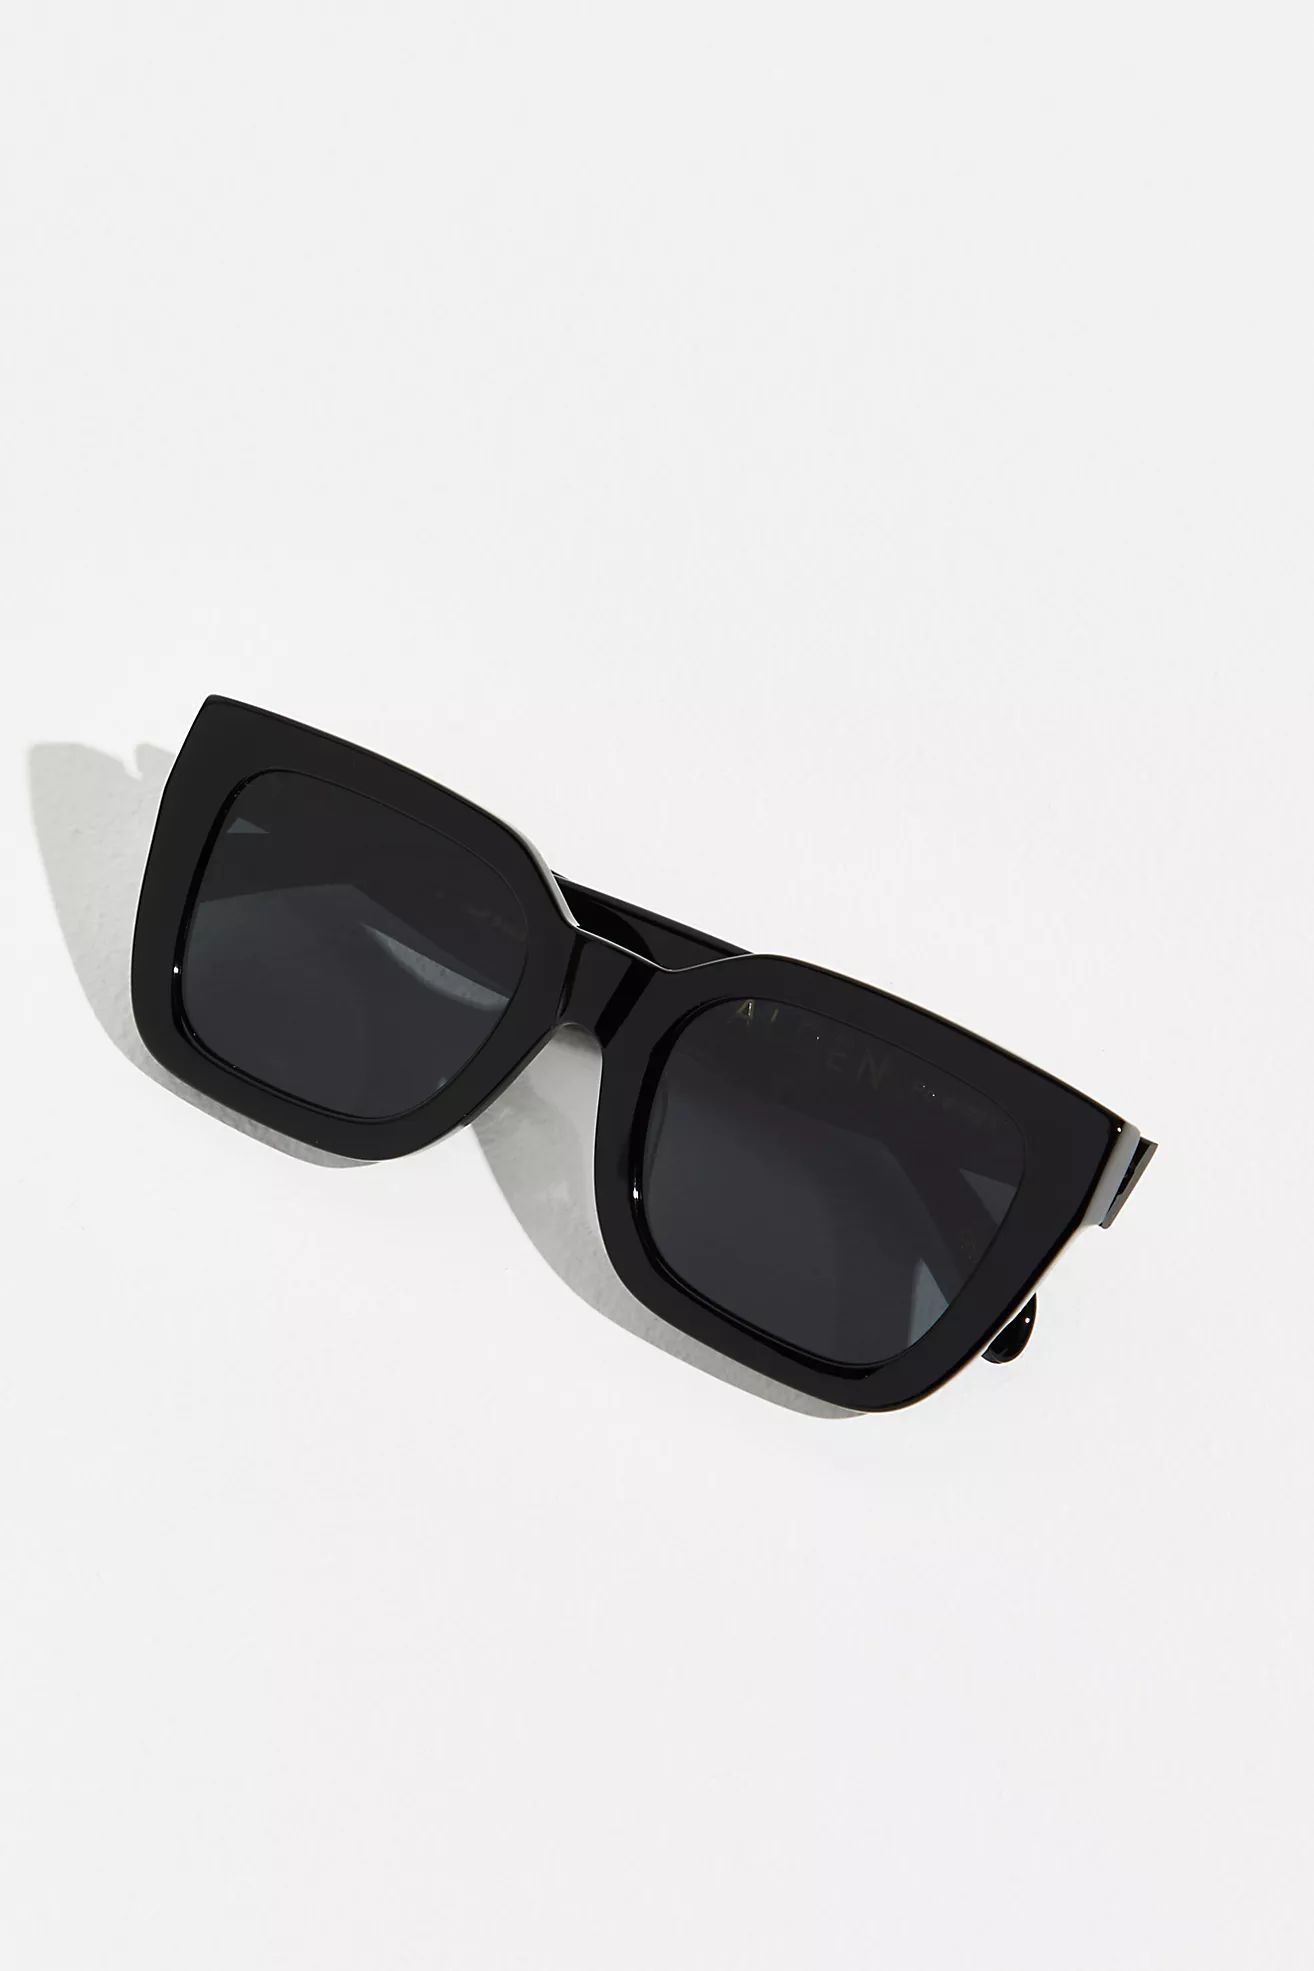 Alden Polarized Sunglasses | Free People (Global - UK&FR Excluded)